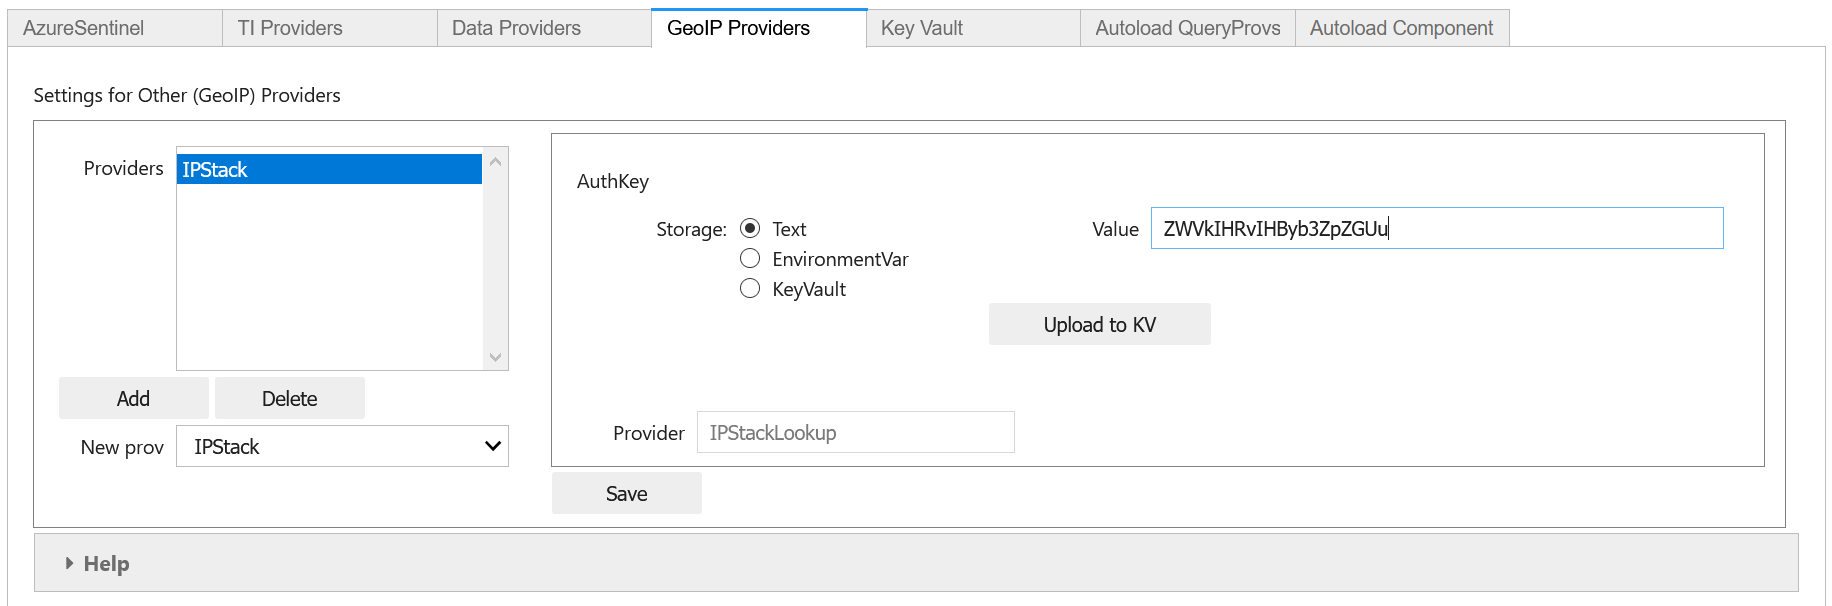 Geo IP provider settings for IPStack